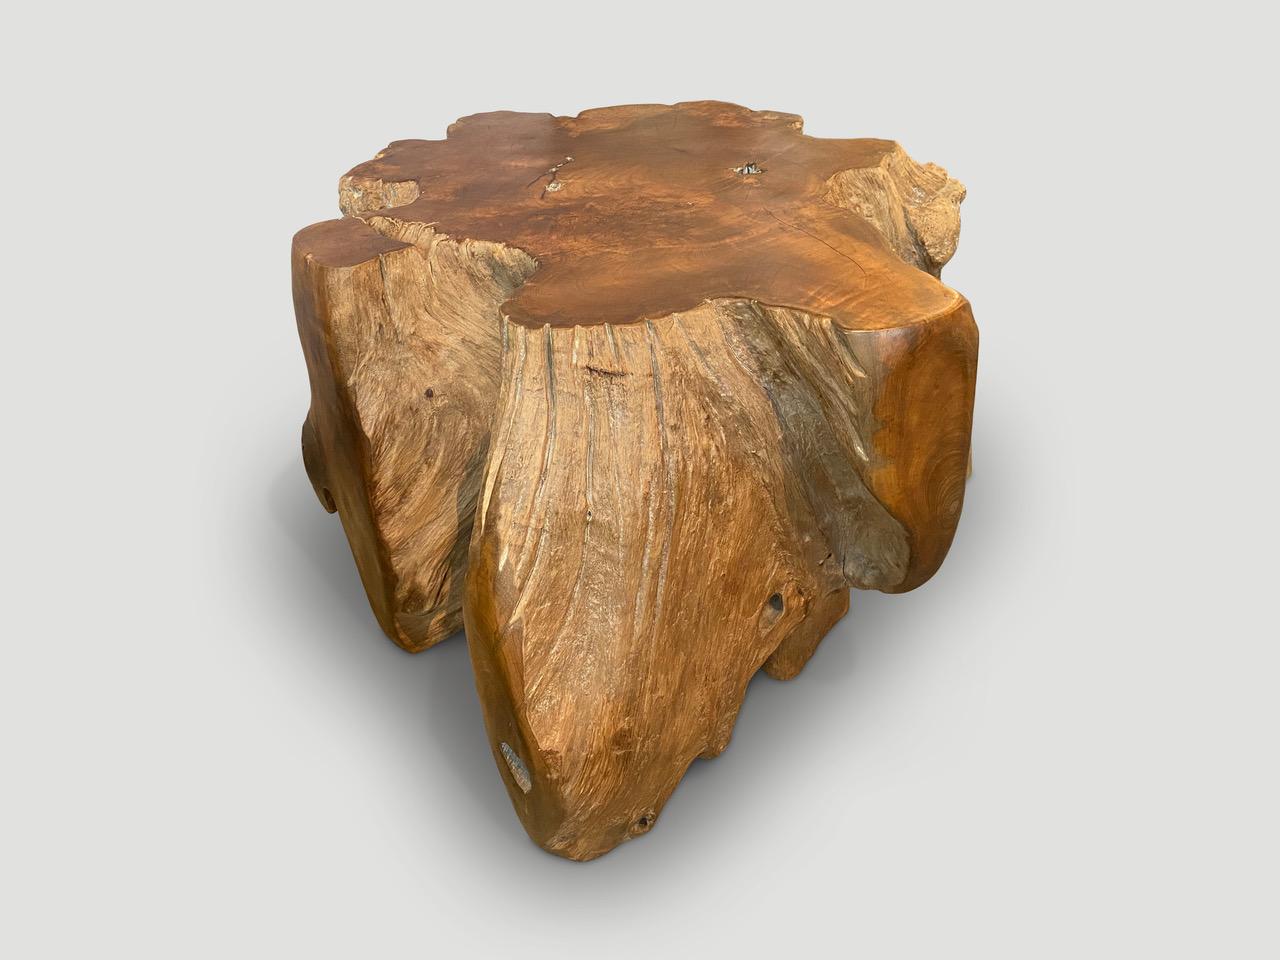 Impressive naturally formed teak pedestal, coffee table or large scale side table. This can also be used as a base for a dining table or entrance table. So many uses for this stunning art piece, both usable and sculptural. We added a natural oil